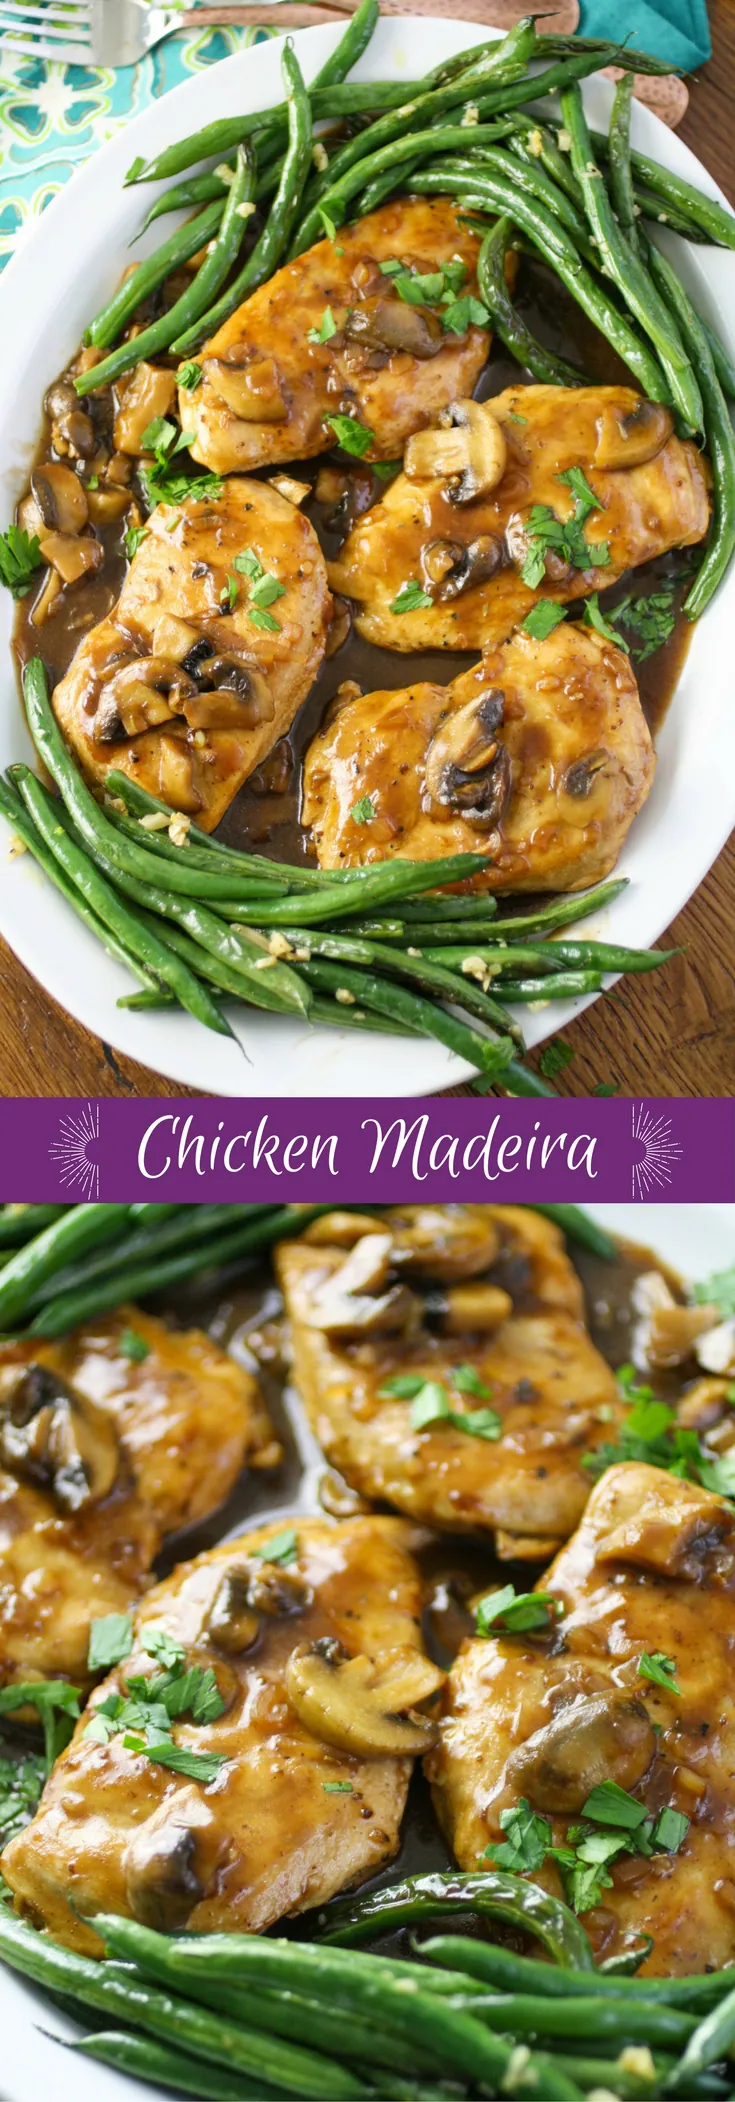 Chicken Madeira is a lovely dish for any occasion. Chicken Madeira is a saucy and rich dish you'll want to dig into.